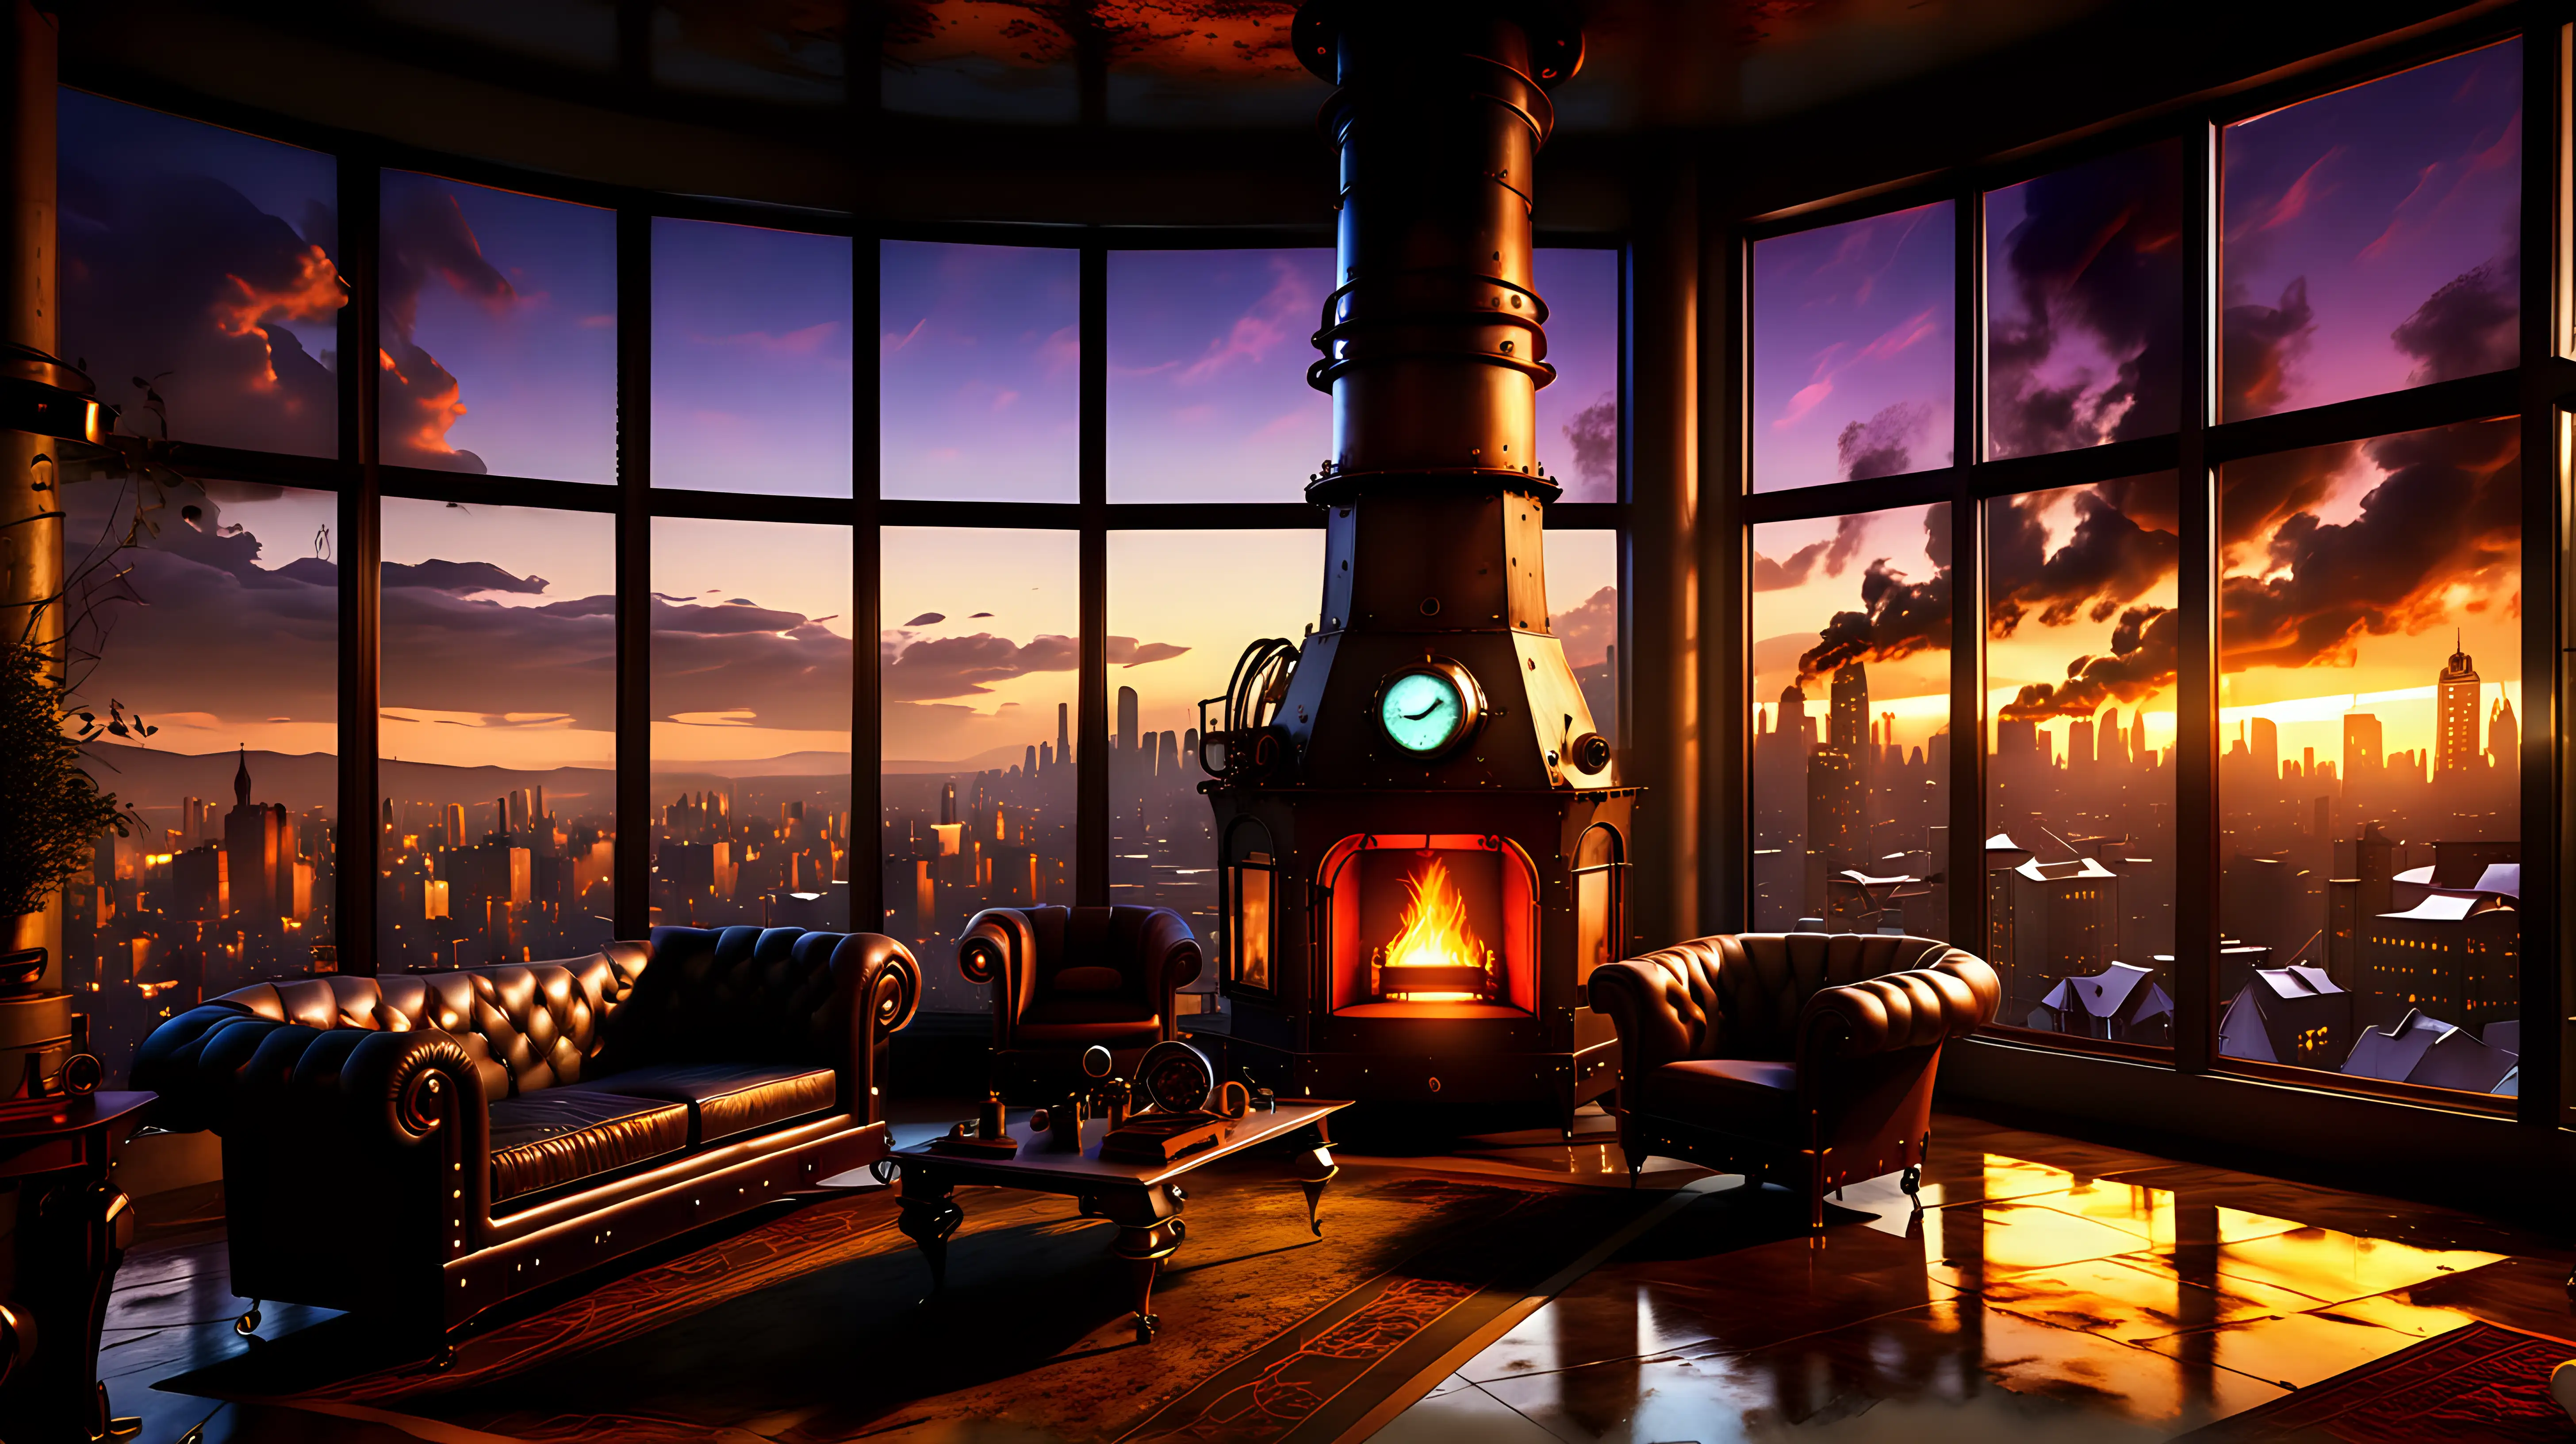 Twilight Steampunk Living Room with City View and Fireplace